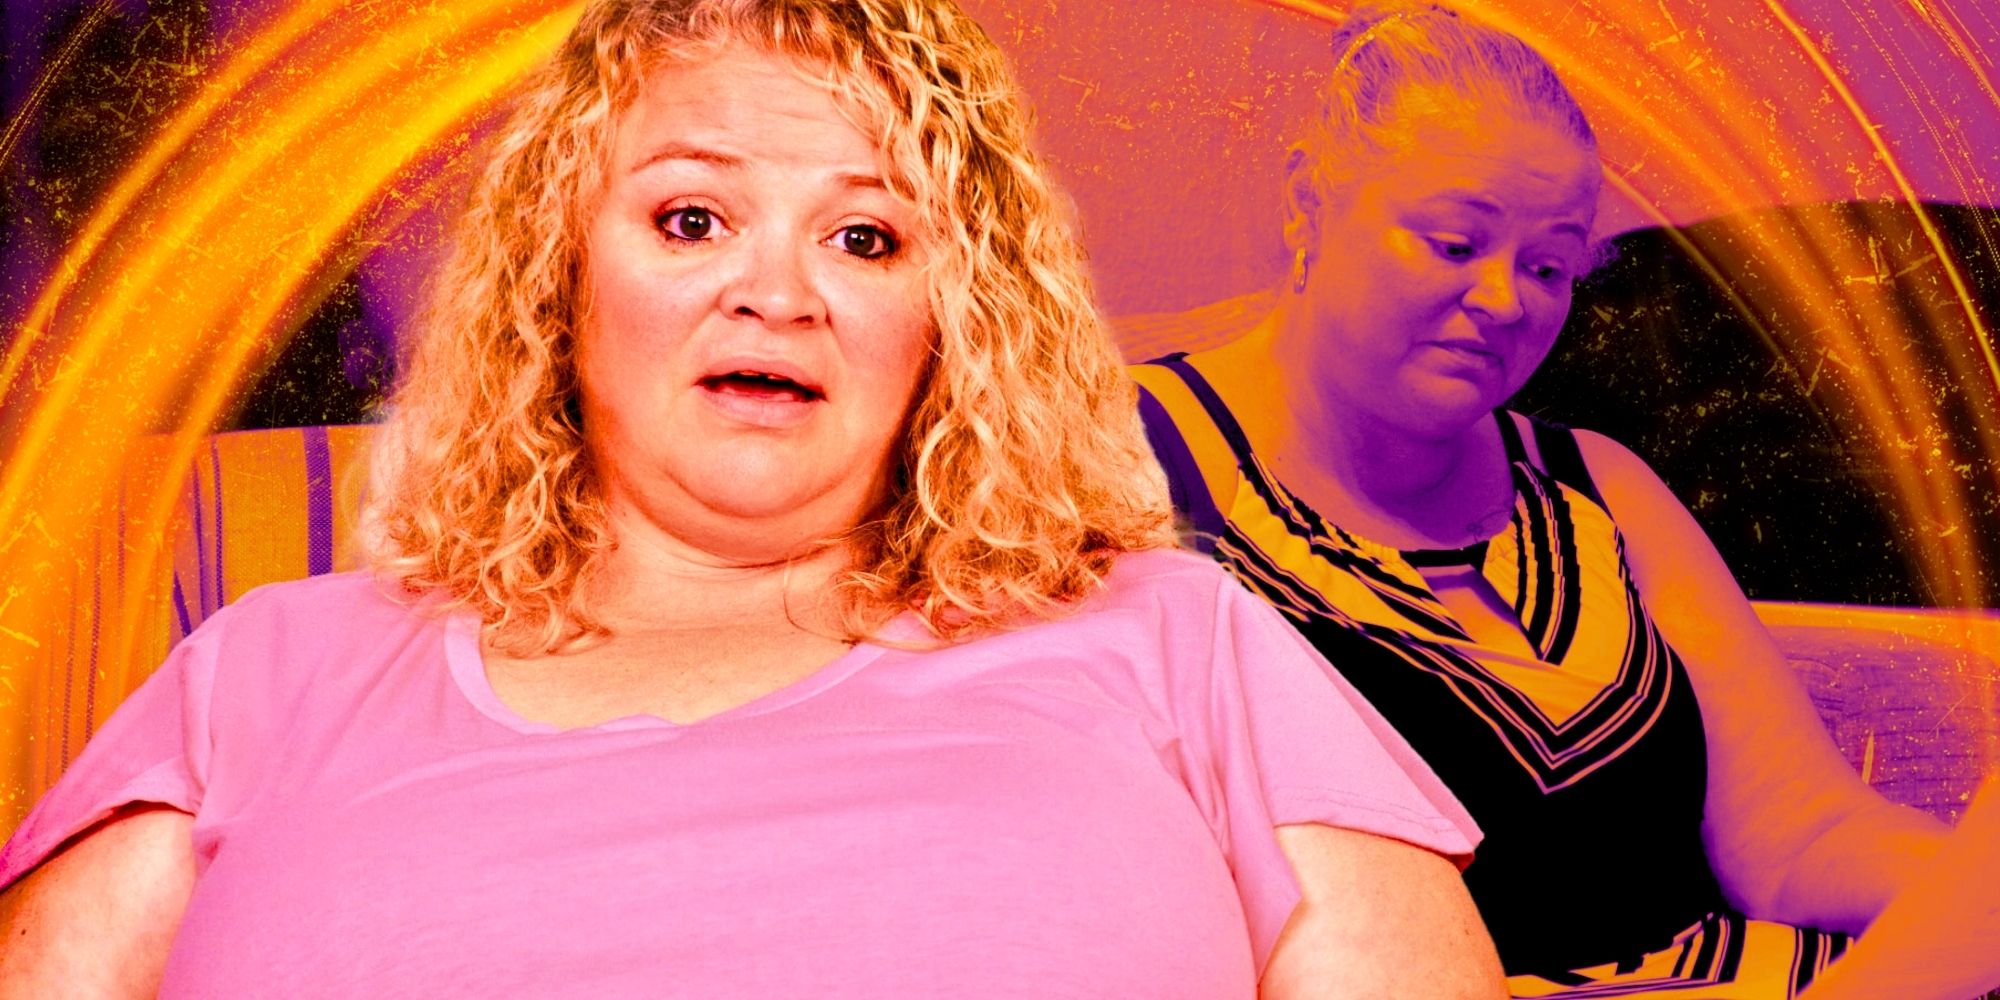 1000-Lb Sisters Amanda Halterman montage with pink and orange background and two images of Amanda